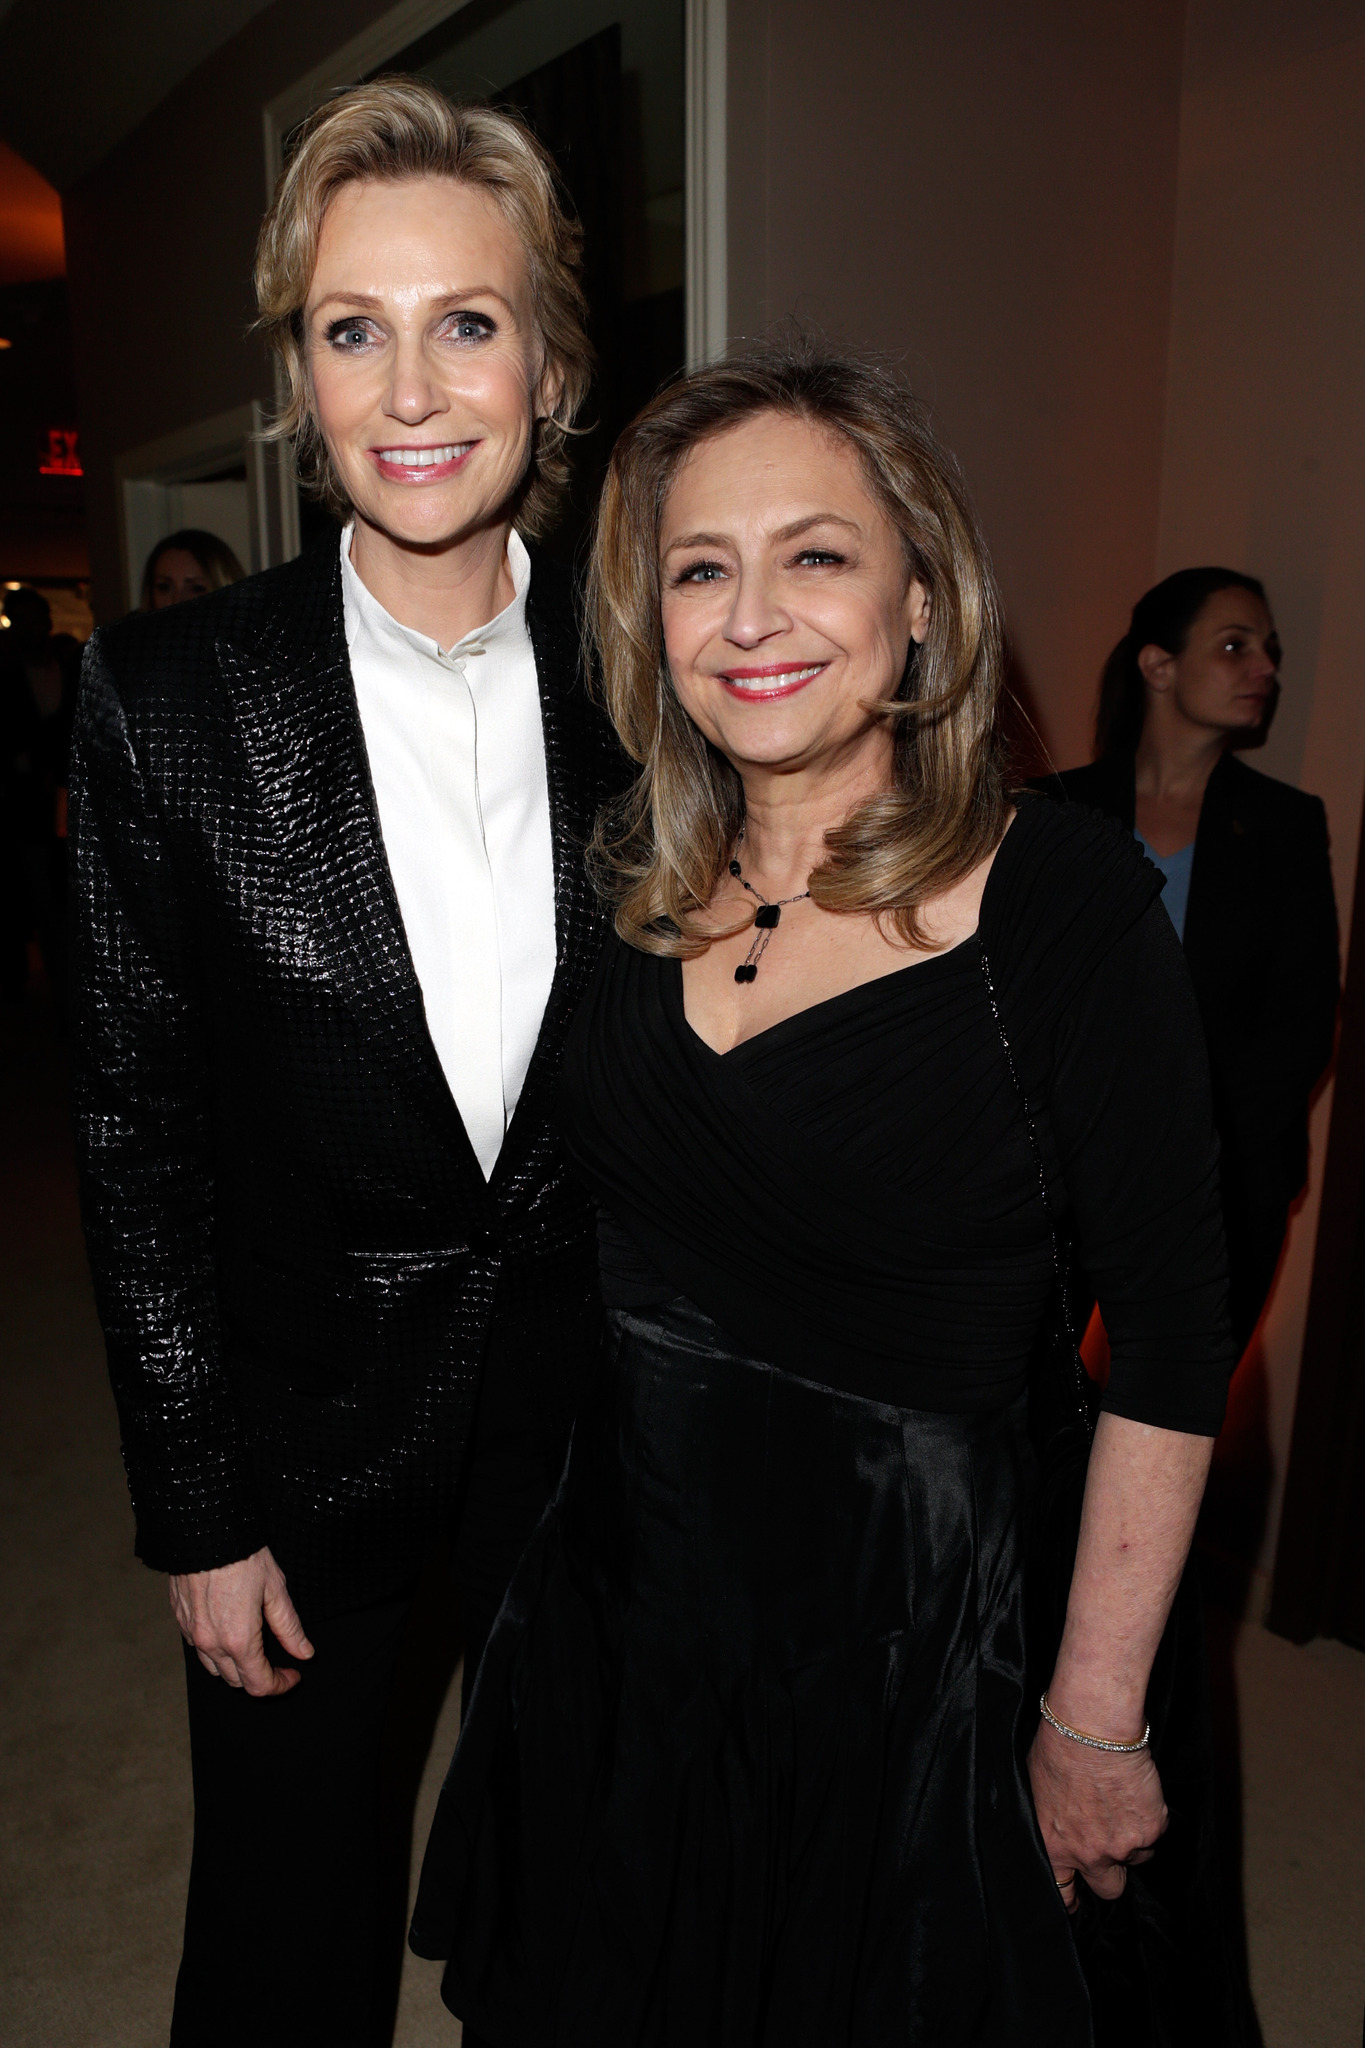 Jane Lynch (L) and Dr. Lara Embry attend the 2013 Vanity Fair Oscar Party hosted by Graydon Carter at Sunset Tower on February 24, 2013 in West Hollywood, California.